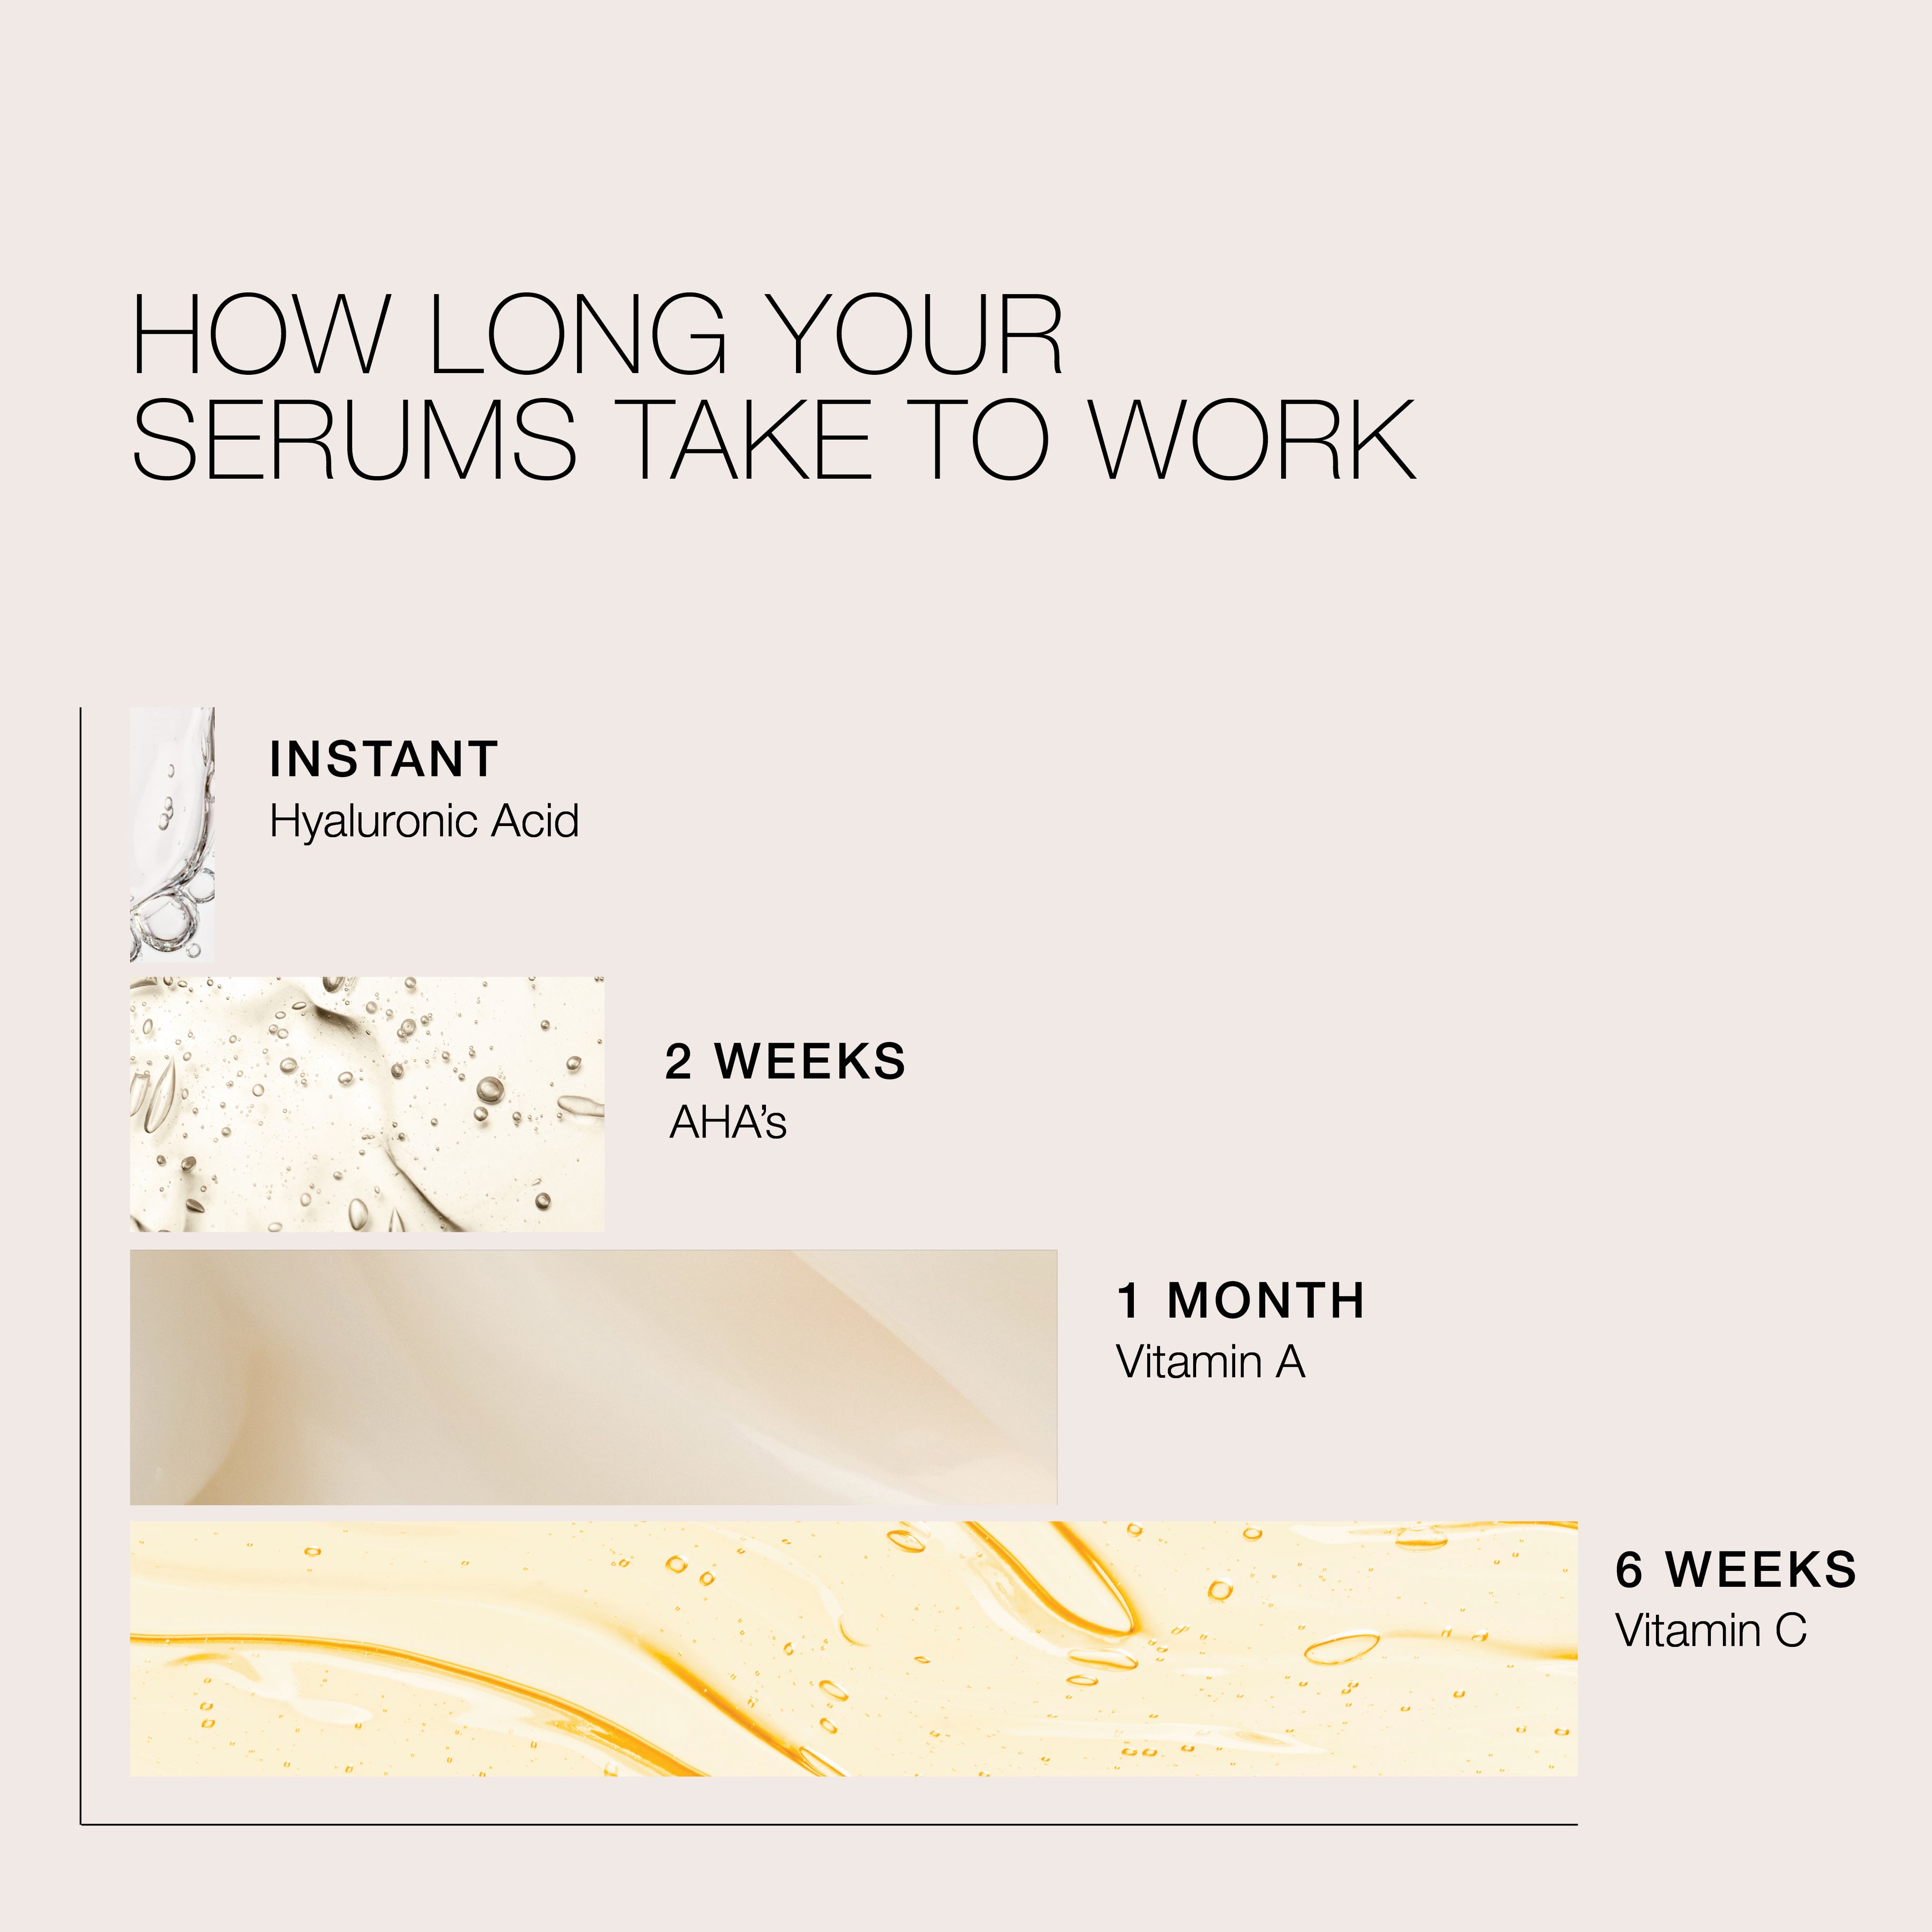 How long do your serums take to work?